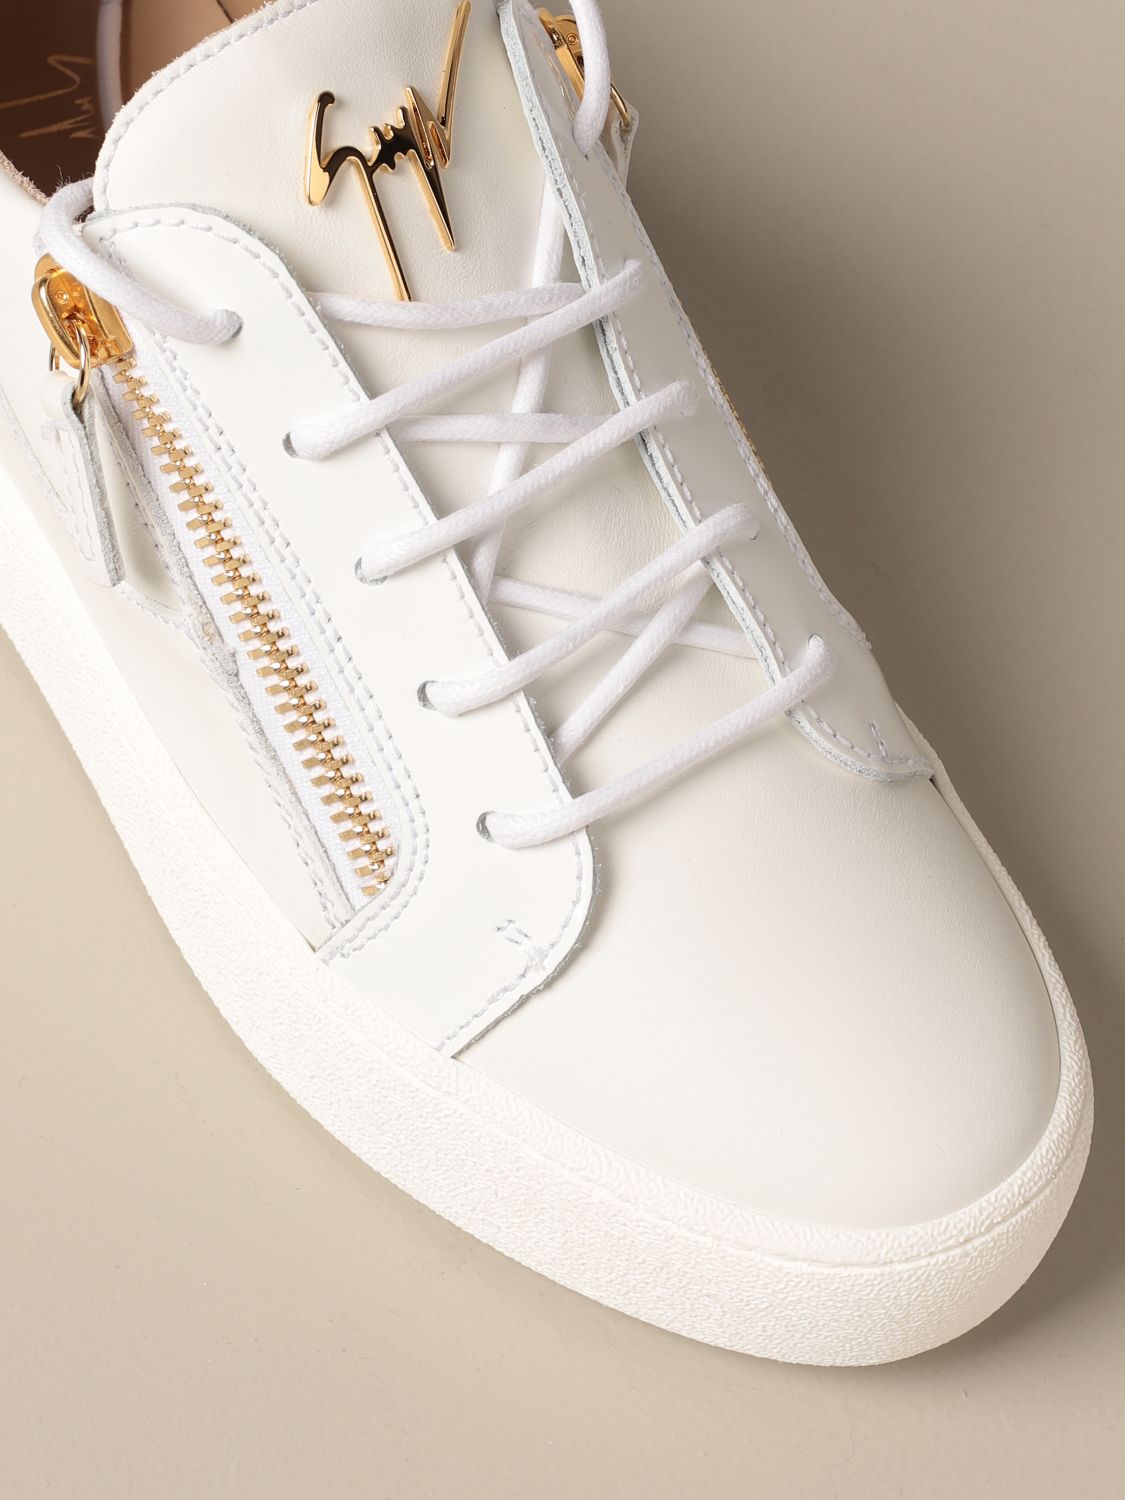 slave Lima Overlevelse GIUSEPPE ZANOTTI DESIGN: Frankie sneakers in leather with python print |  Sneakers Giuseppe Zanotti Design Men White 1 | Sneakers Giuseppe Zanotti  Design RU00010 GIGLIO.COM